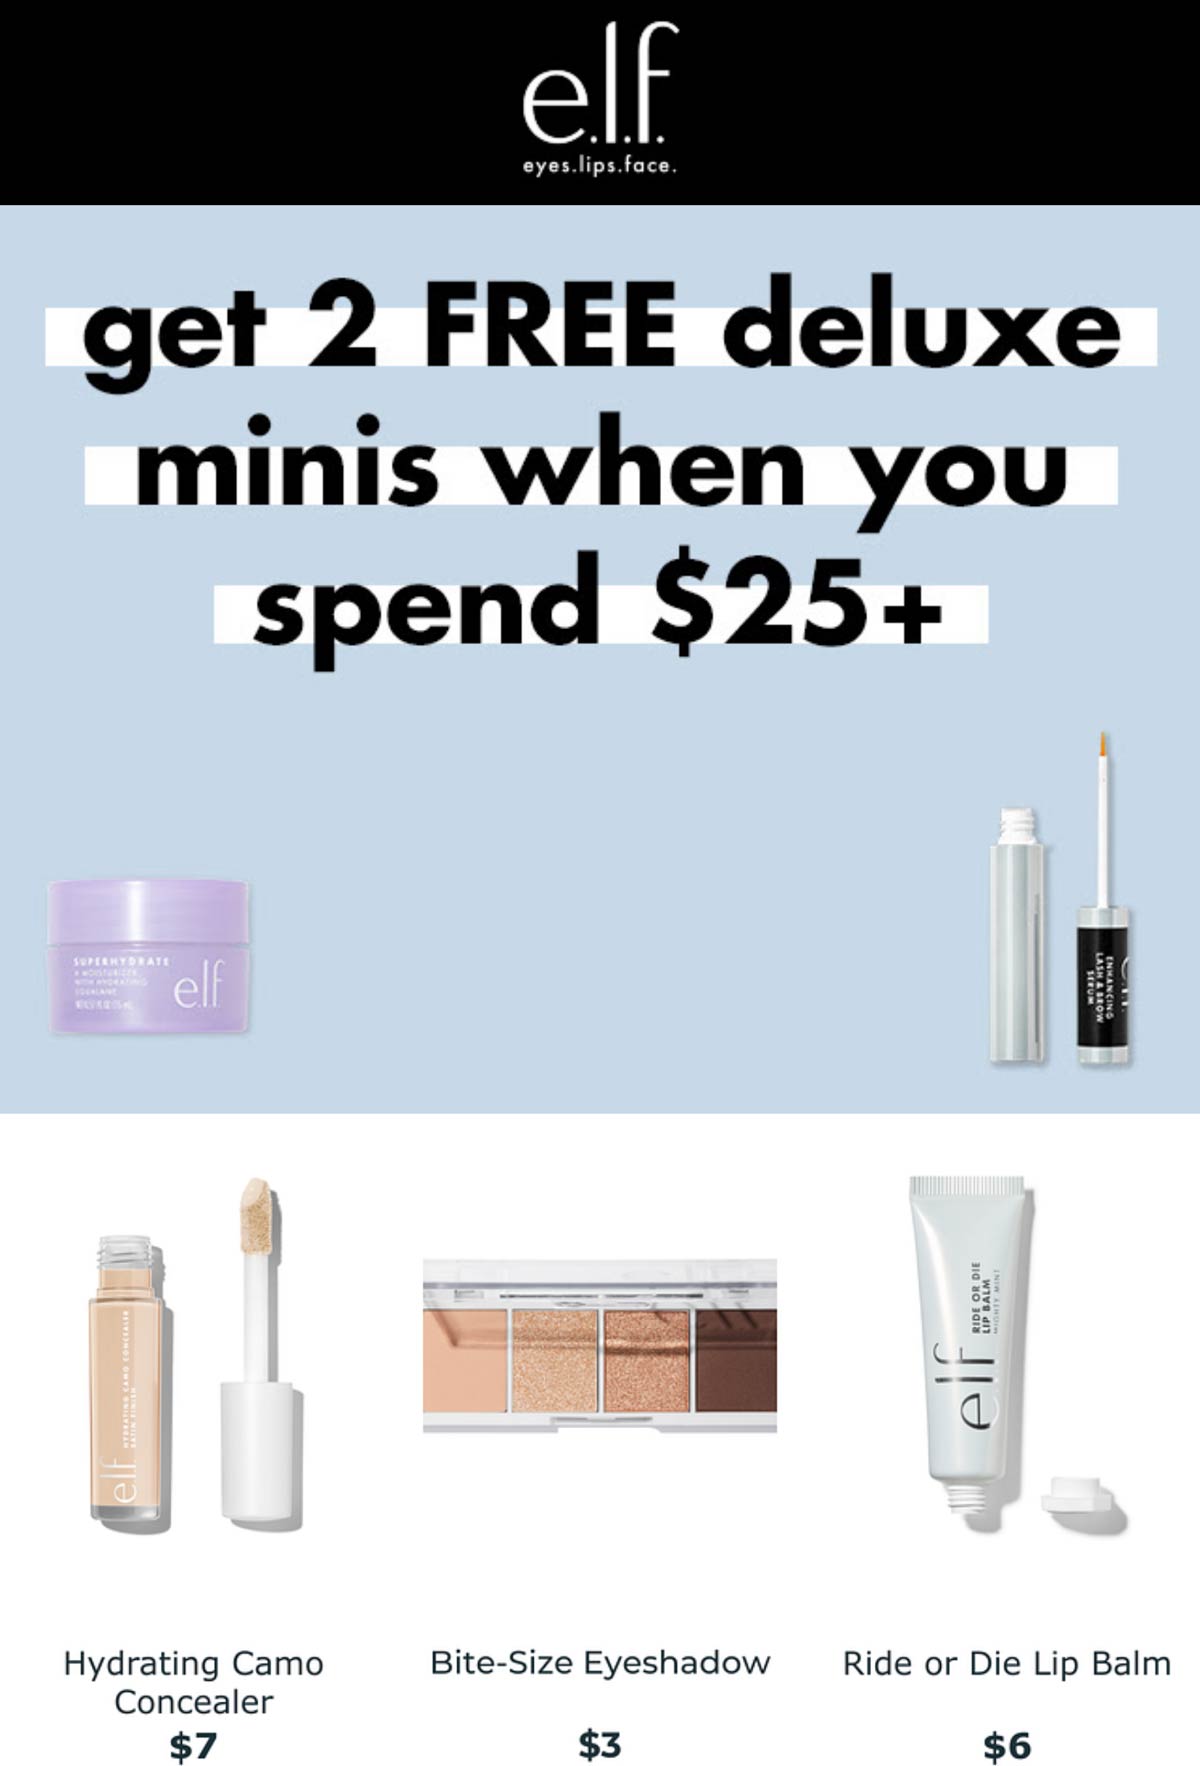 e.l.f. Cosmetics stores Coupon  2 free deluxe minis on $25 at e.l.f. Cosmetics #elfcosmetics 